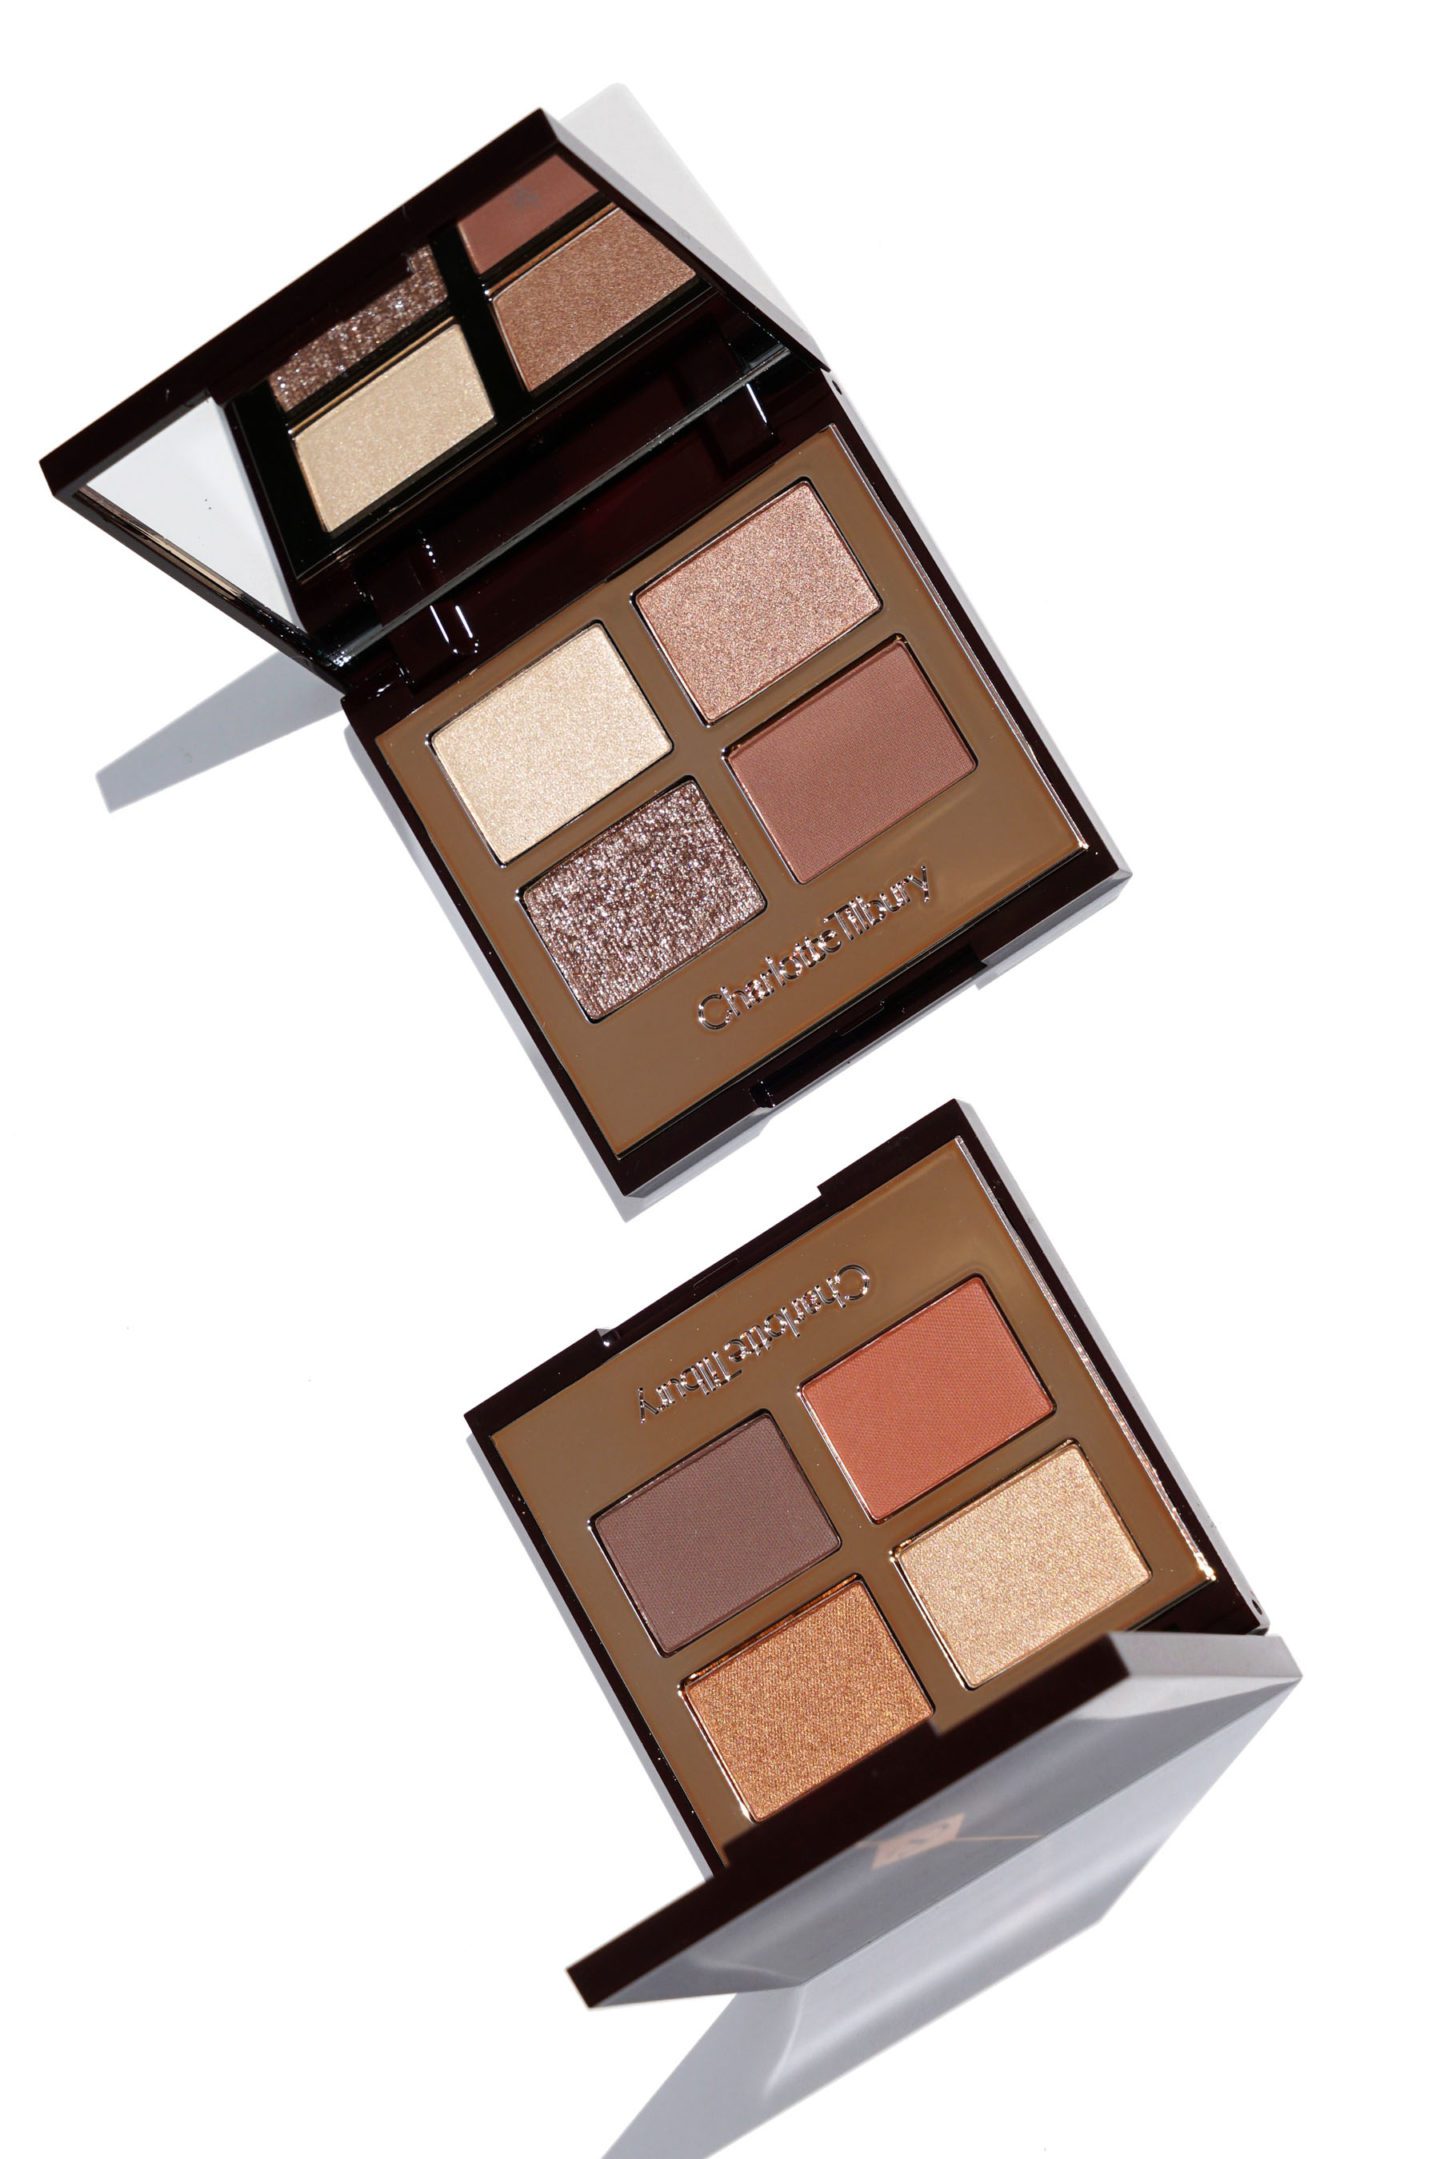 Charlotte Tilbury Bigger Brighter Eyes Palettes in Exaggereyes and Transformeyes | The Beauty Look Book